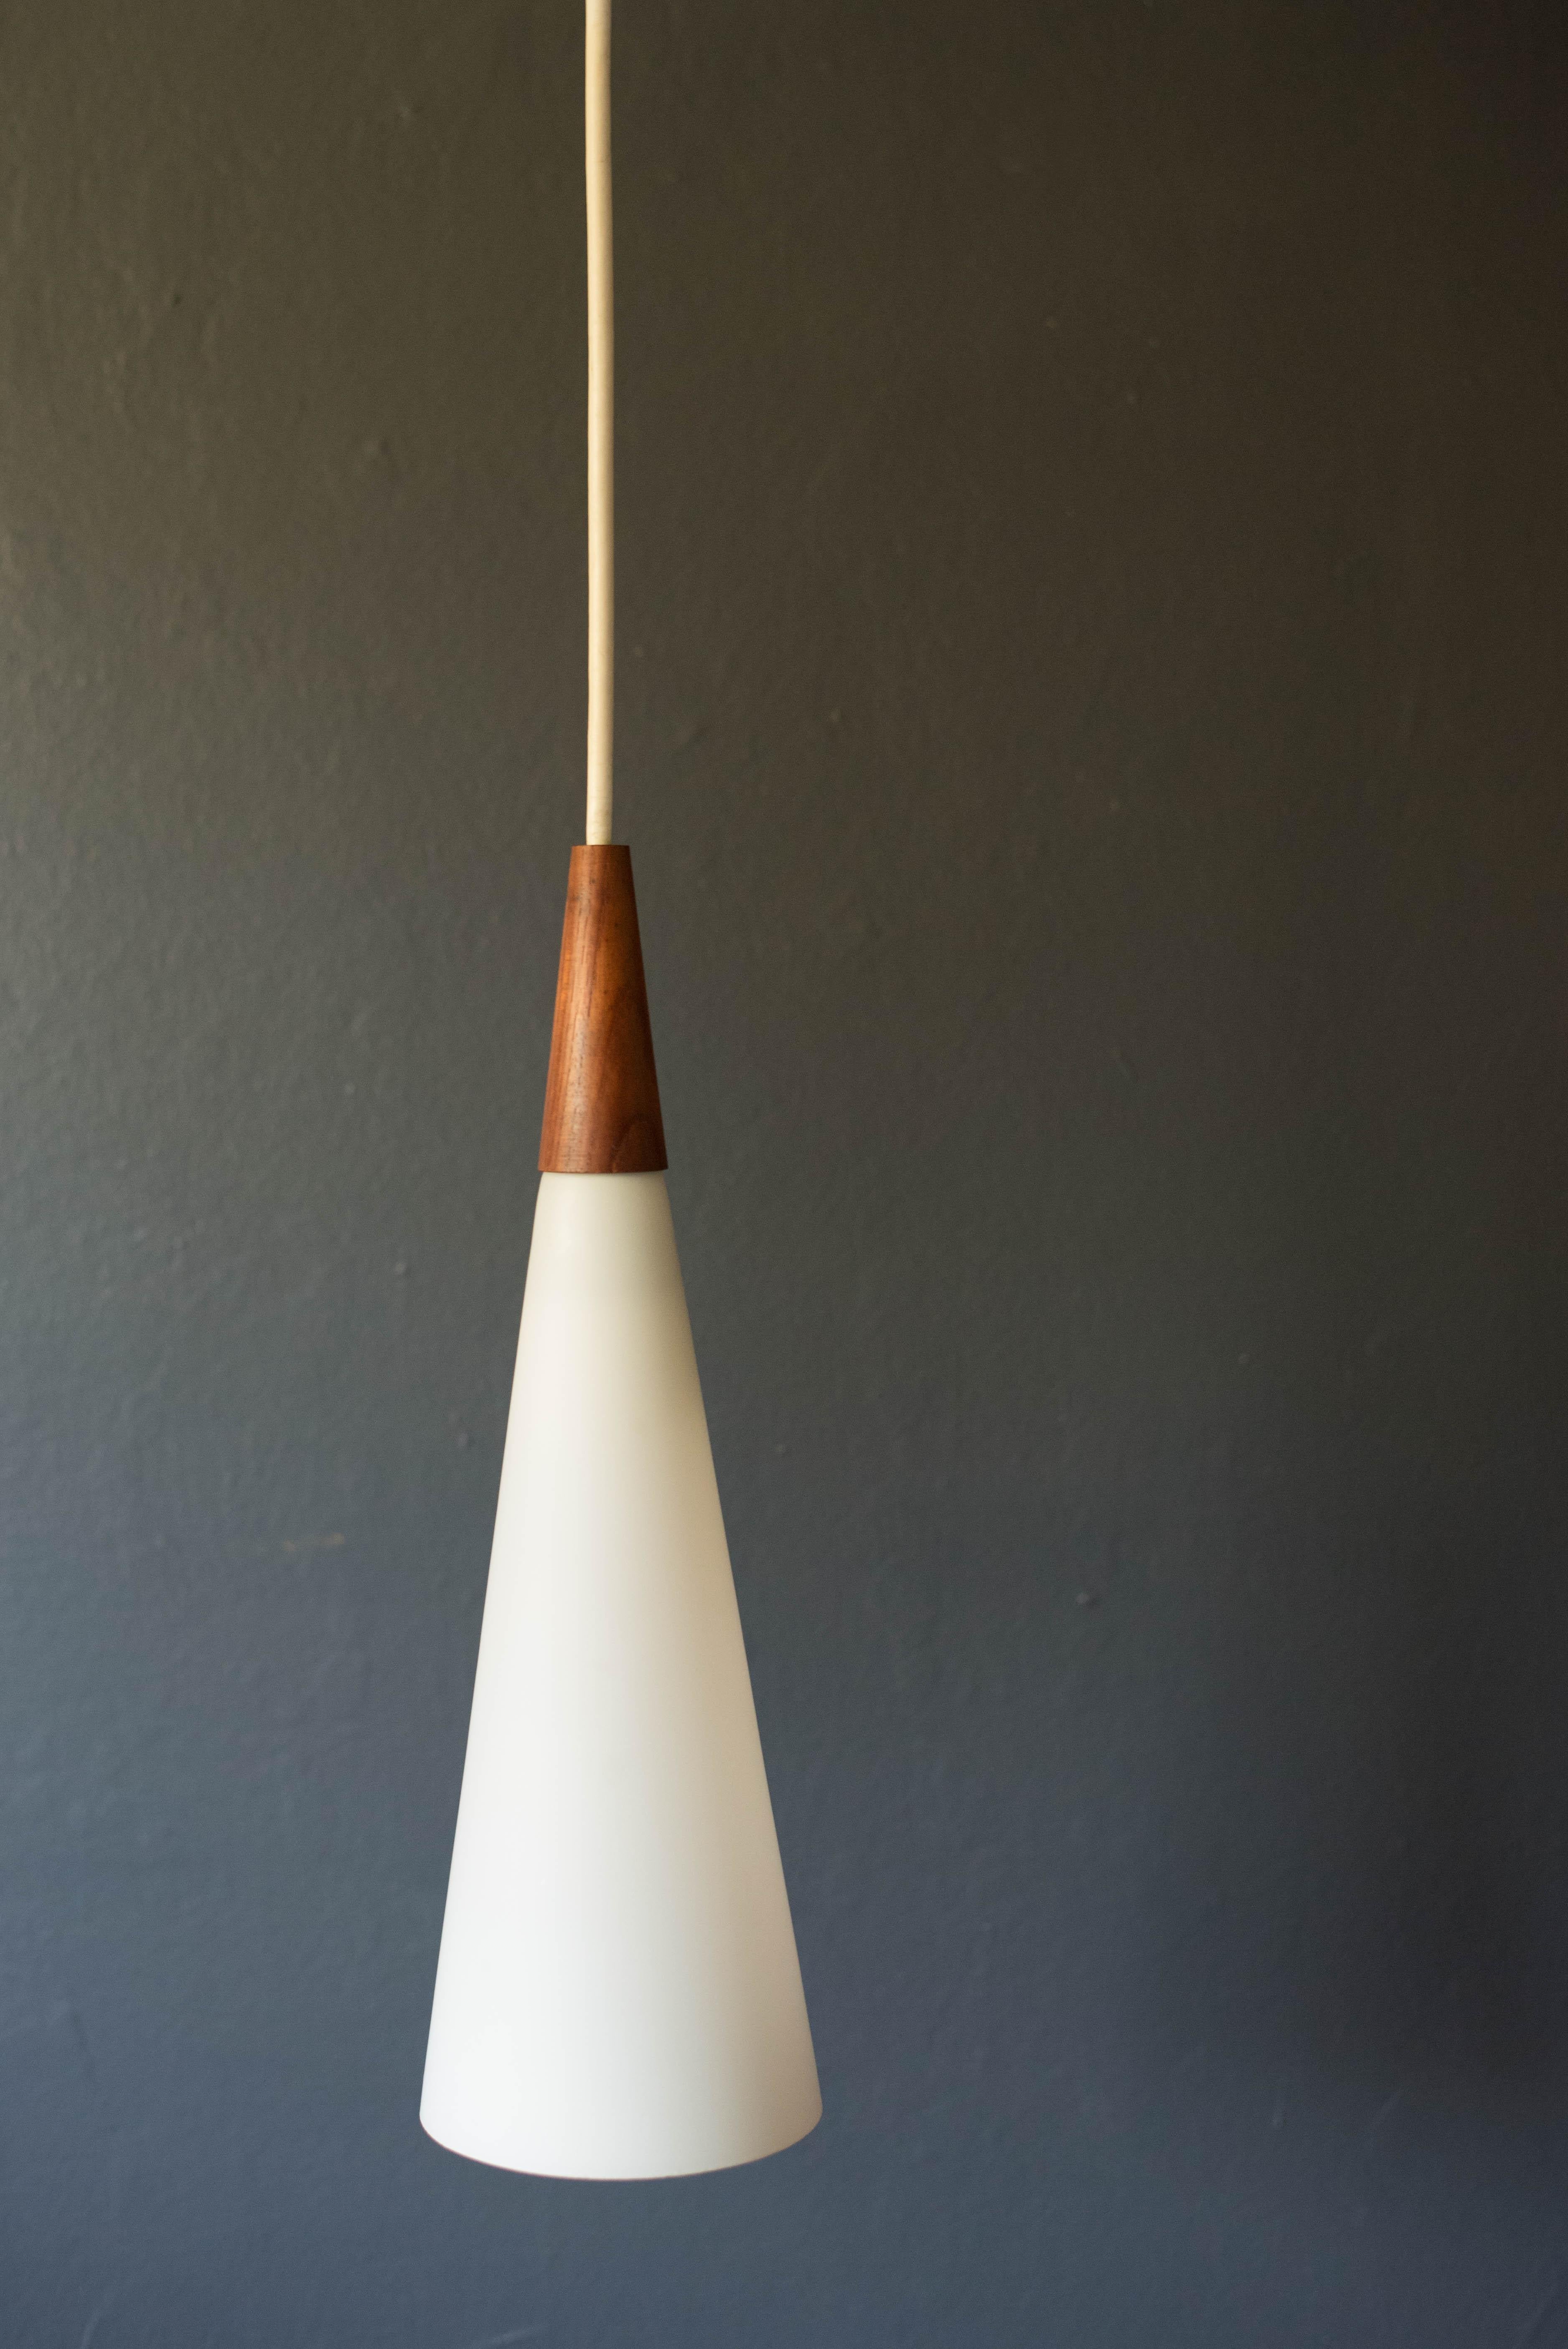 Mid-Century Modern hanging pendant by Holmegaard, circa 1960s. This piece displays a white frosted glass shade that emits a glowing light accented with teak trim.